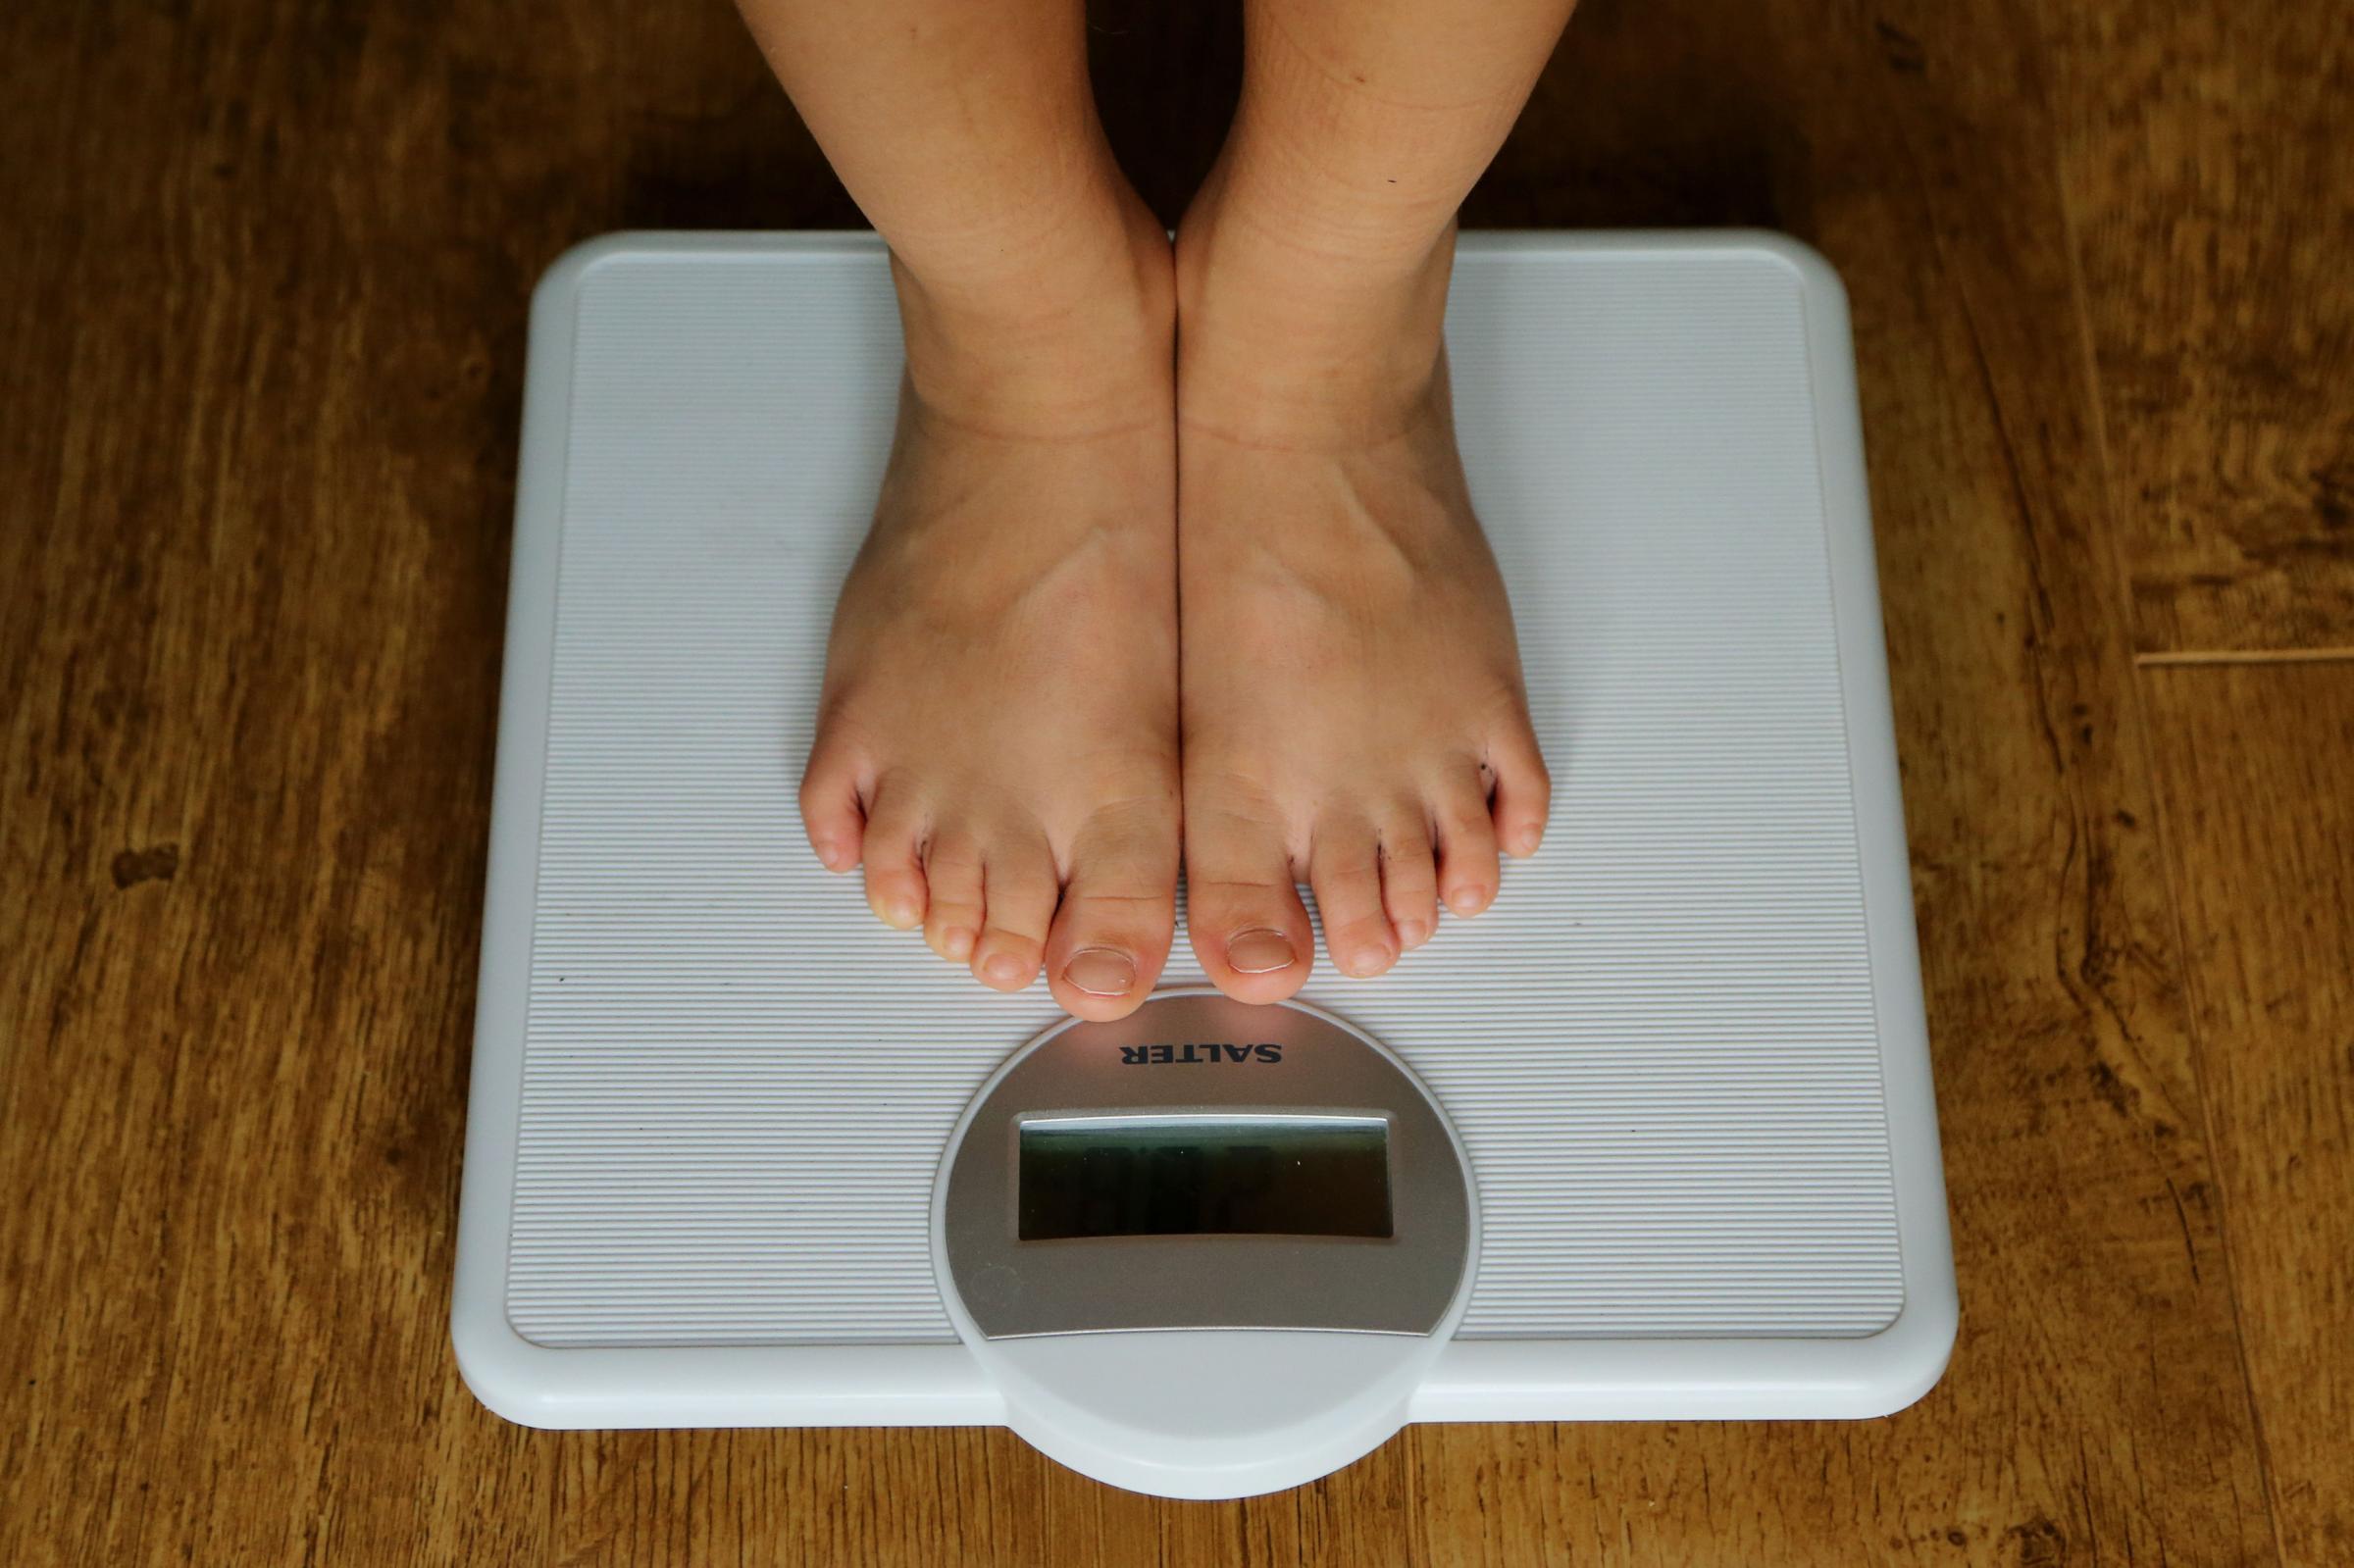 LETTER TO THE EDITOR: Councils should consider taking overweight children into care